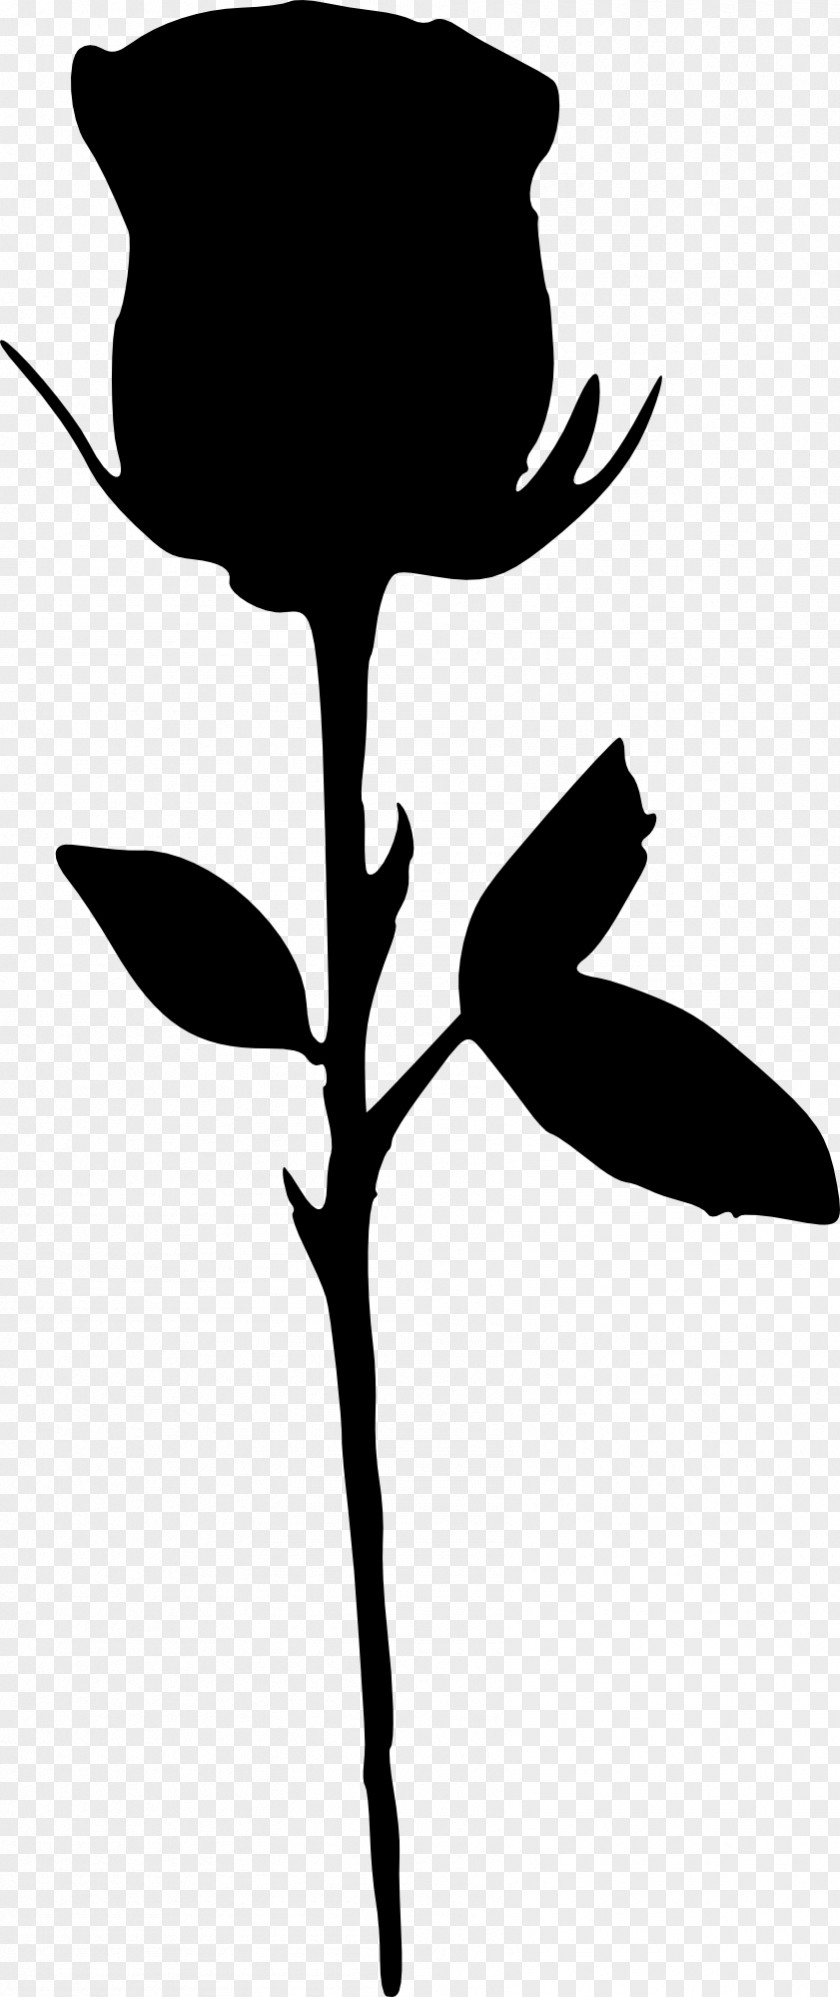 Rose Outline Silhouette Black And White Clip Art PNG